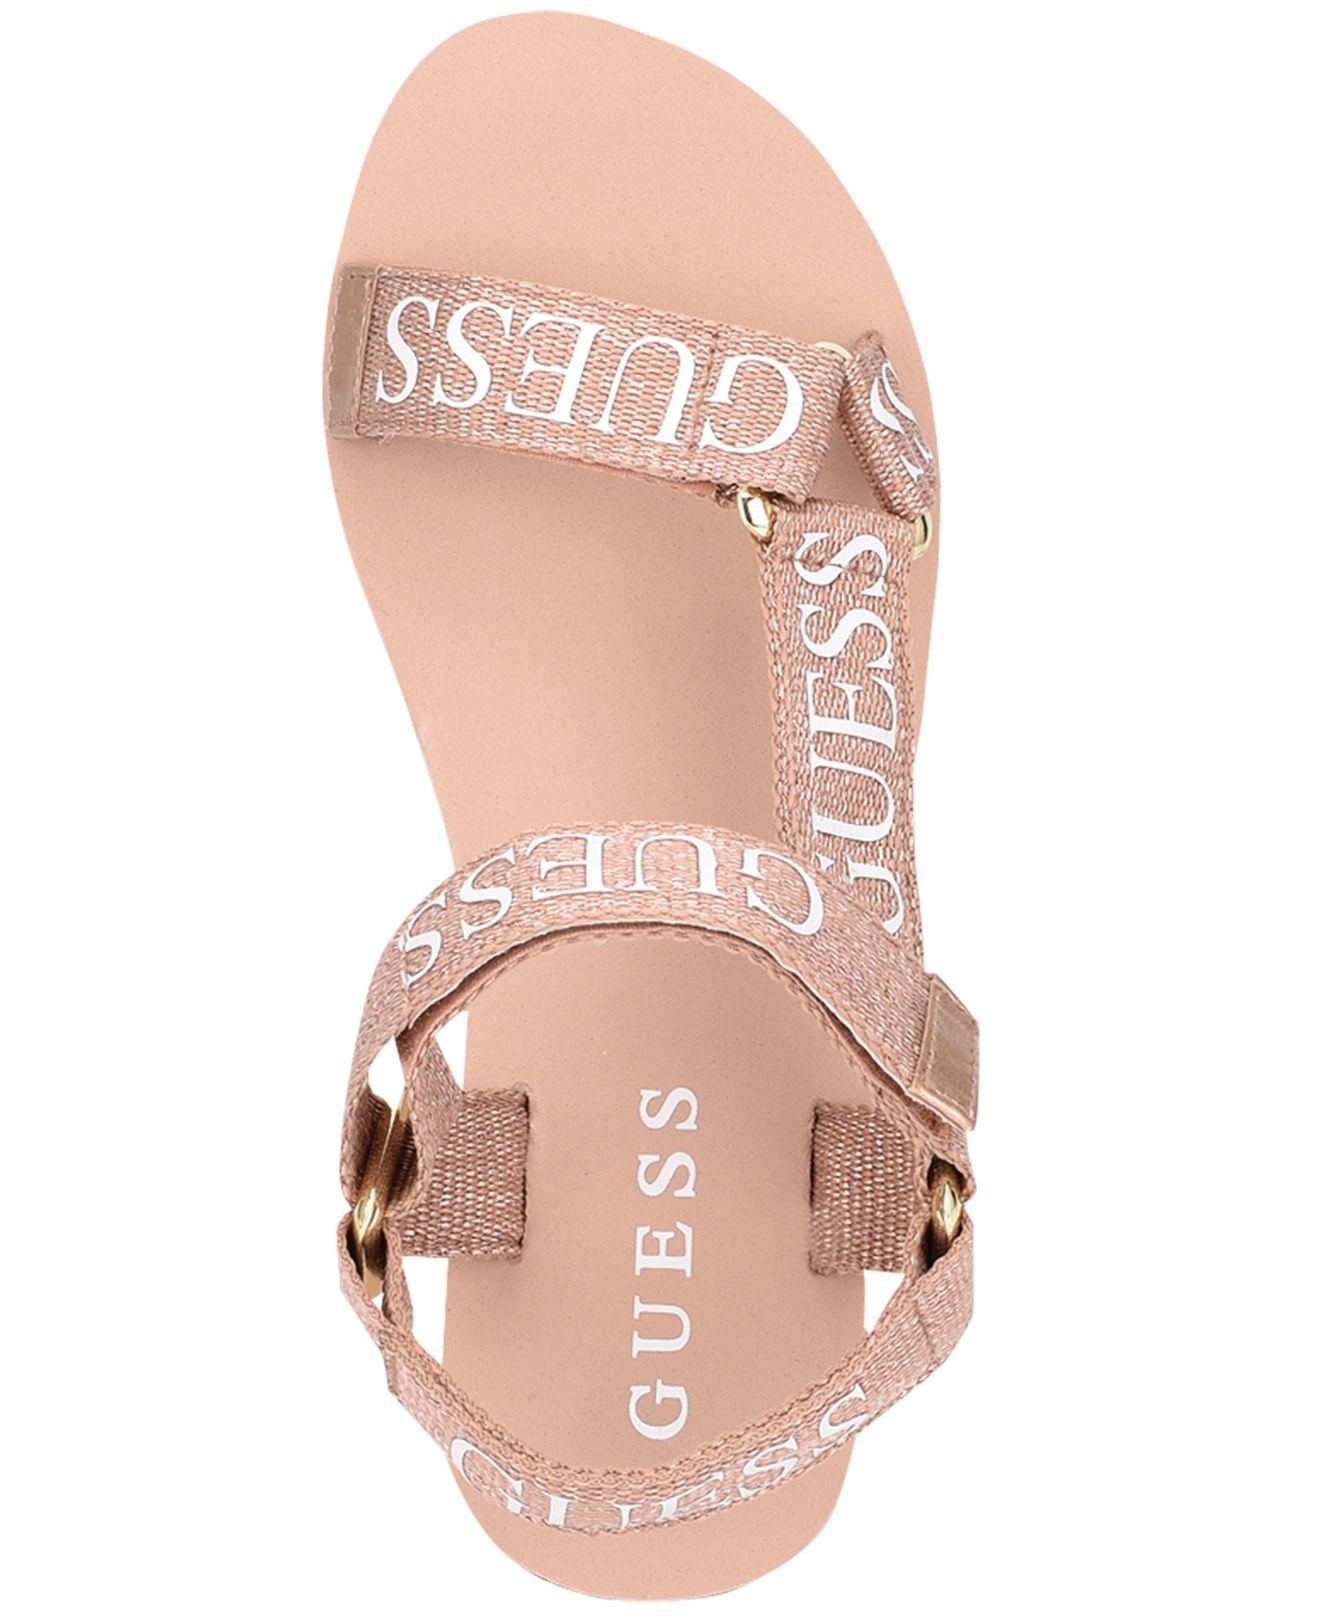 Buy > guess strap sandals > in stock